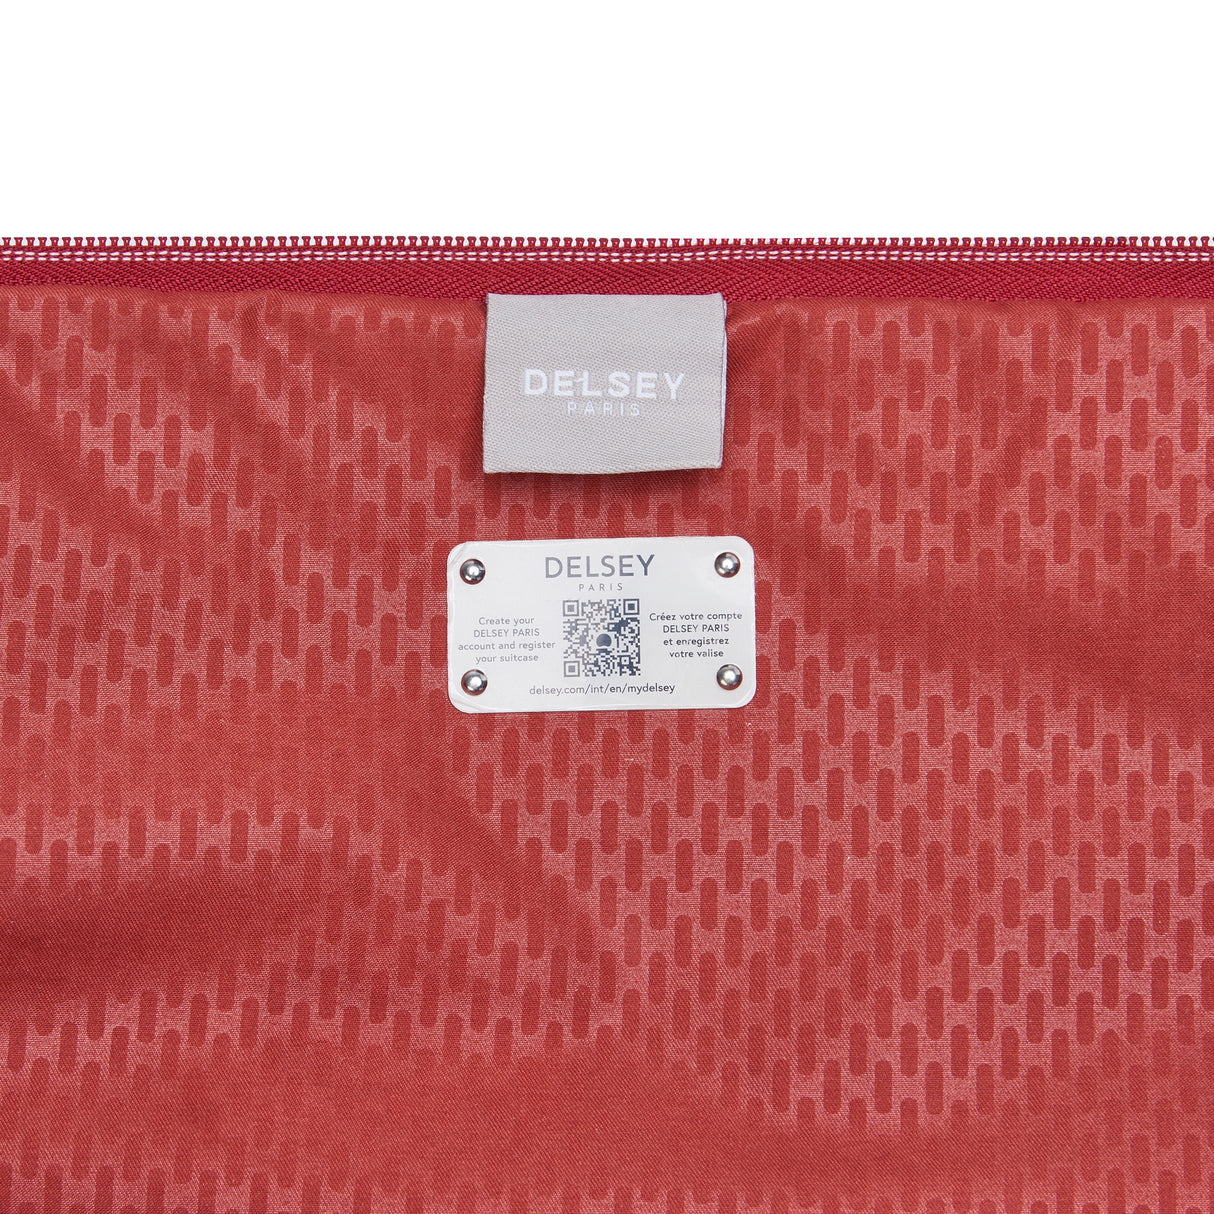 Delsey Chatelet Air 2.0 Tote Bag , , delsey-chatelet-air-2.0-40167640202-14